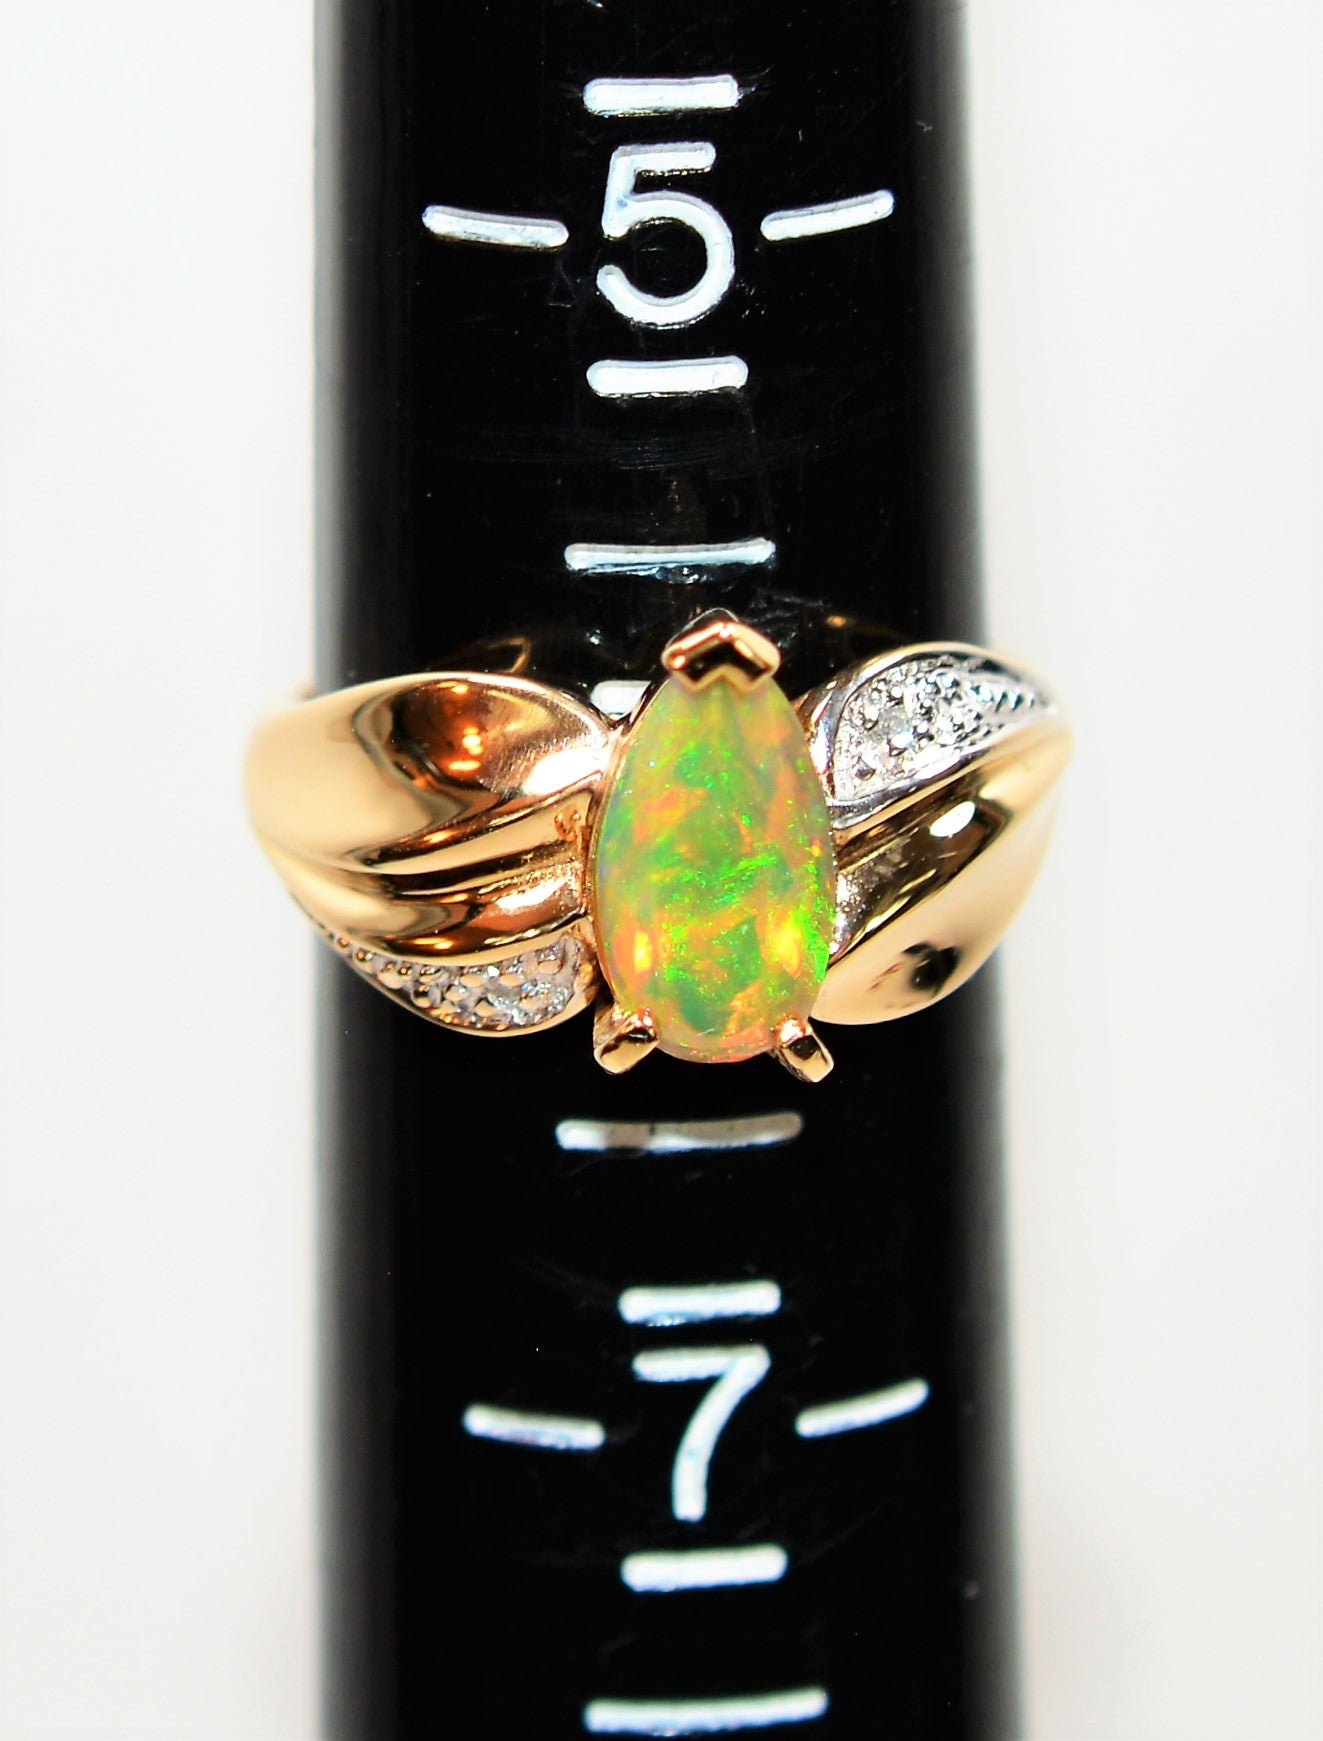 Natural Brazilian Jelly Opal & Diamond Ring 14K Solid Gold 1.02tcw Gemstone Ring Statement Ring Fine Estate Ring Cocktail Ring Vintage Ring